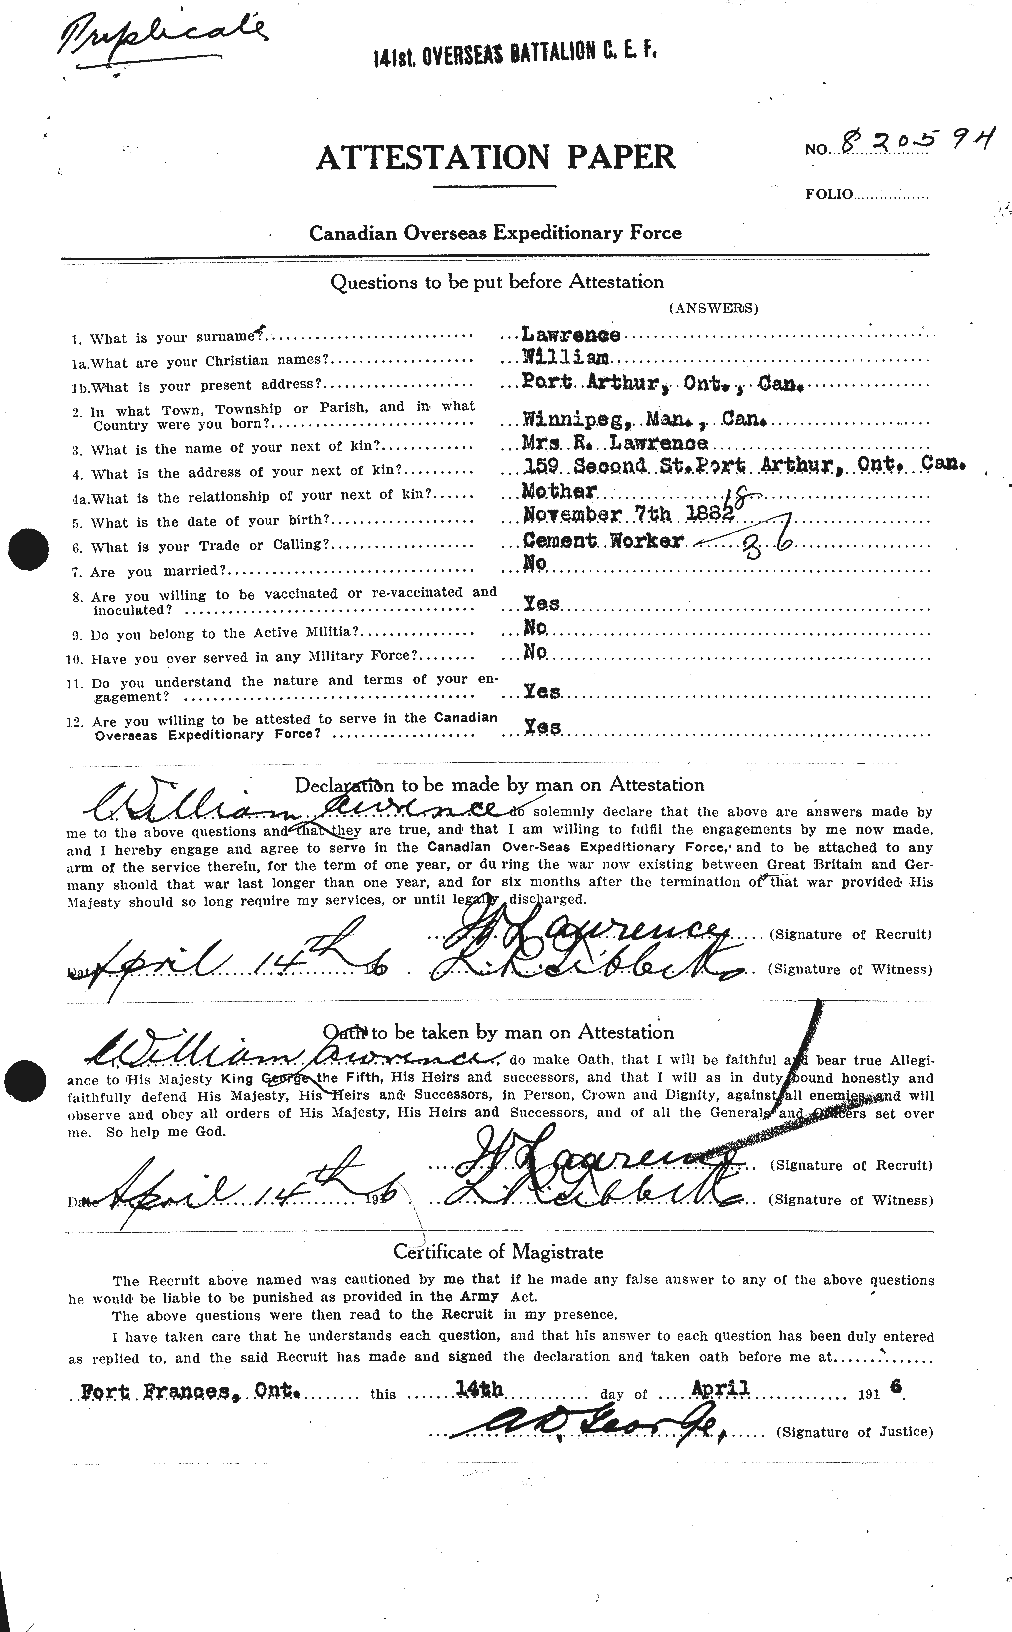 Personnel Records of the First World War - CEF 454708a